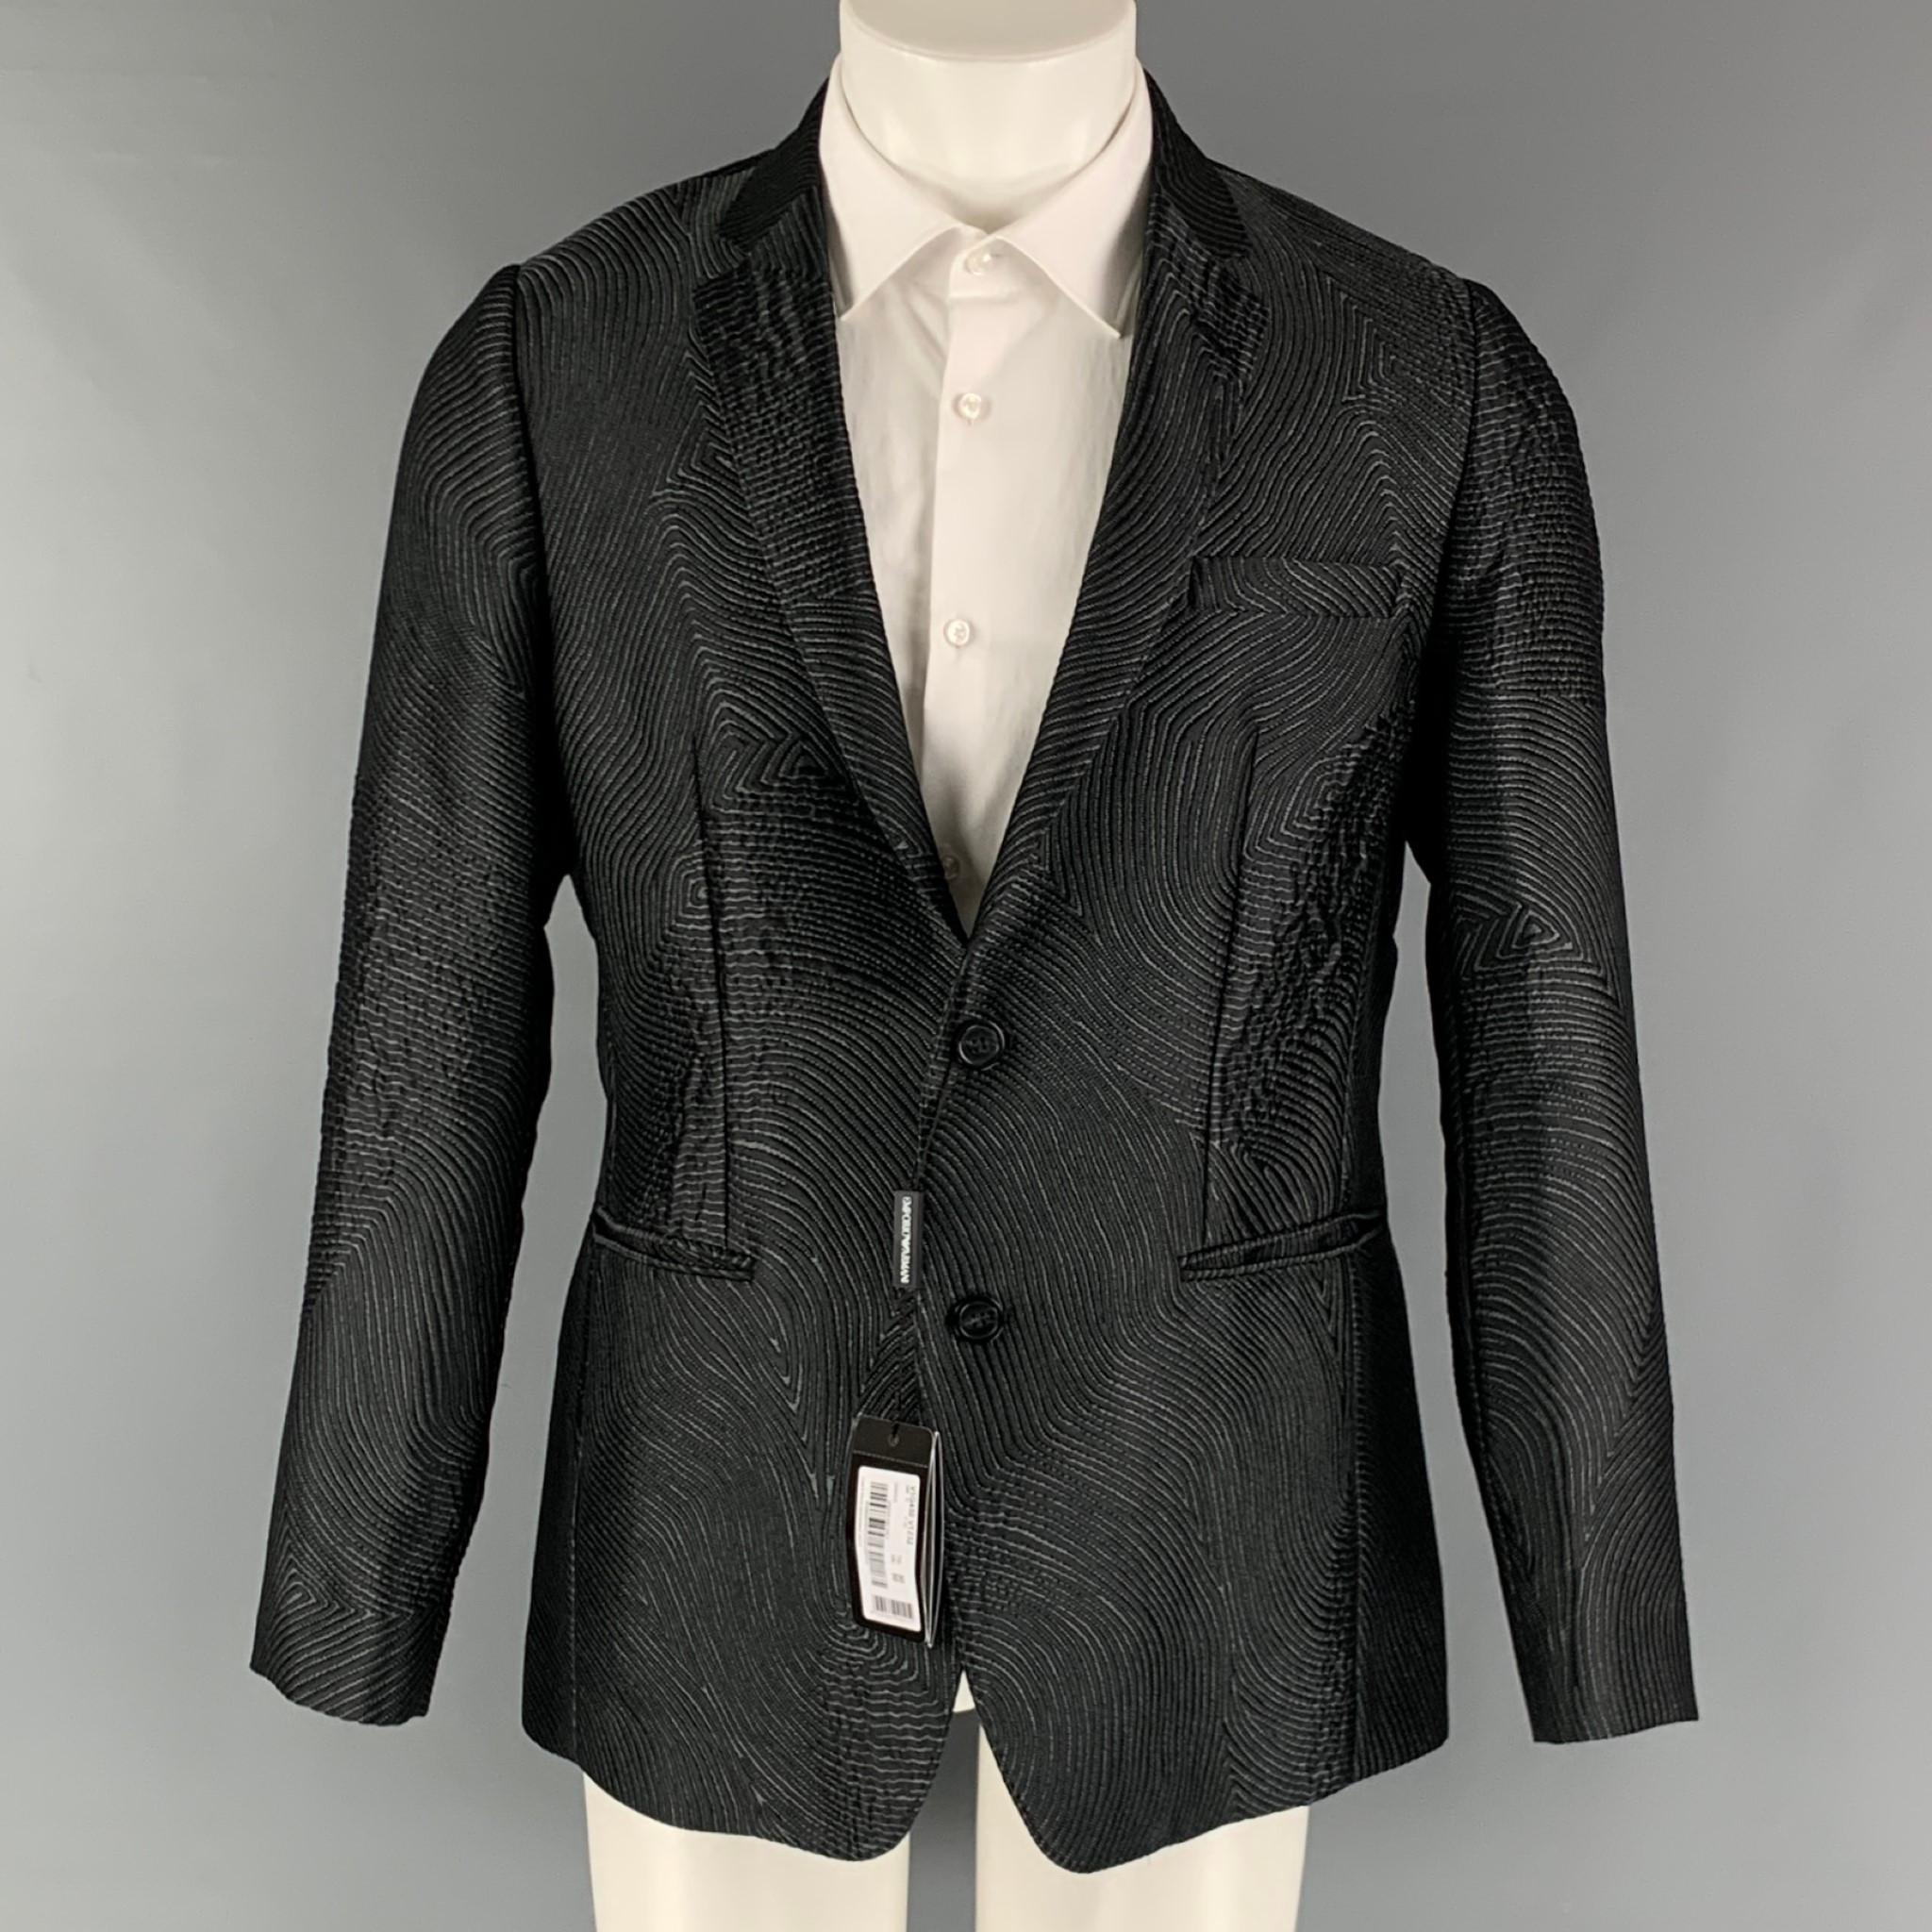 EMPORIO ARMANI sport coat comes in a black and grey jacquard polyester blend woven material with no lining featuring a notch lapel, welt pockets, and a two button closure. Made in Italy.

New with Tags.
Marked: 50

Measurements:

Shoulder: 17